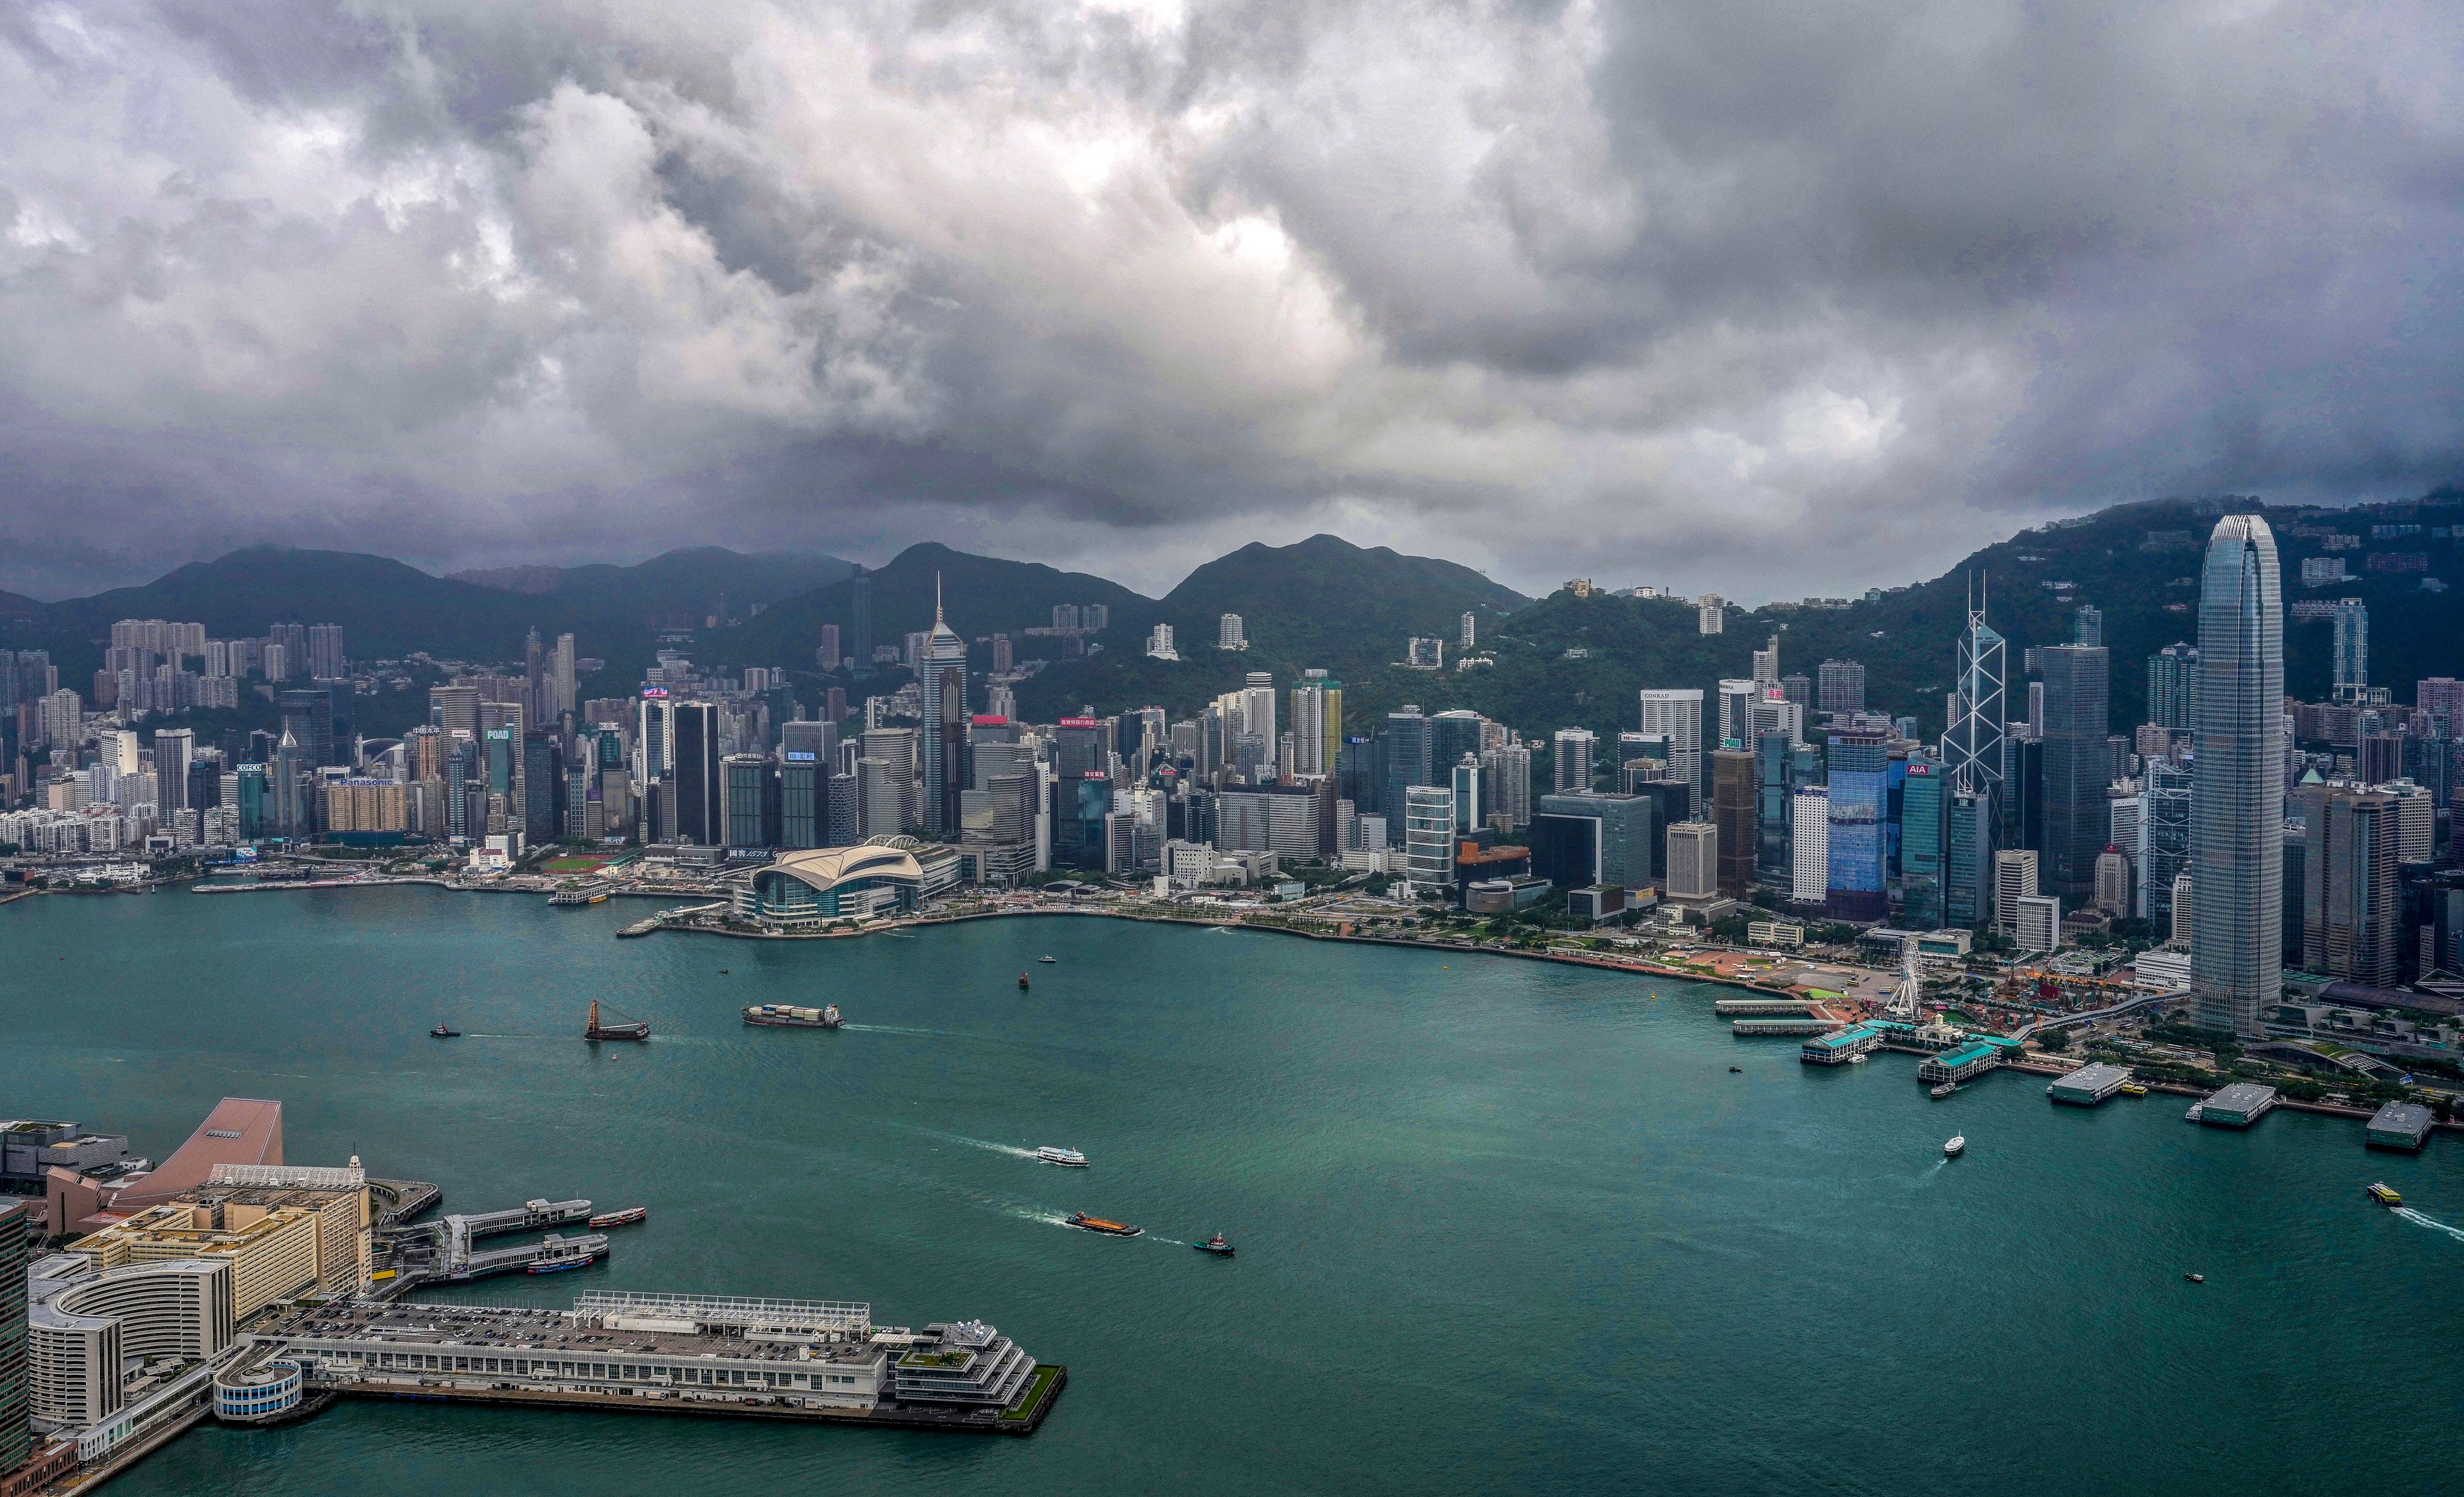 Authorities have said they will present a bill within the year to facilitate reclamation in Victoria Harbour. Photo: Elson Li